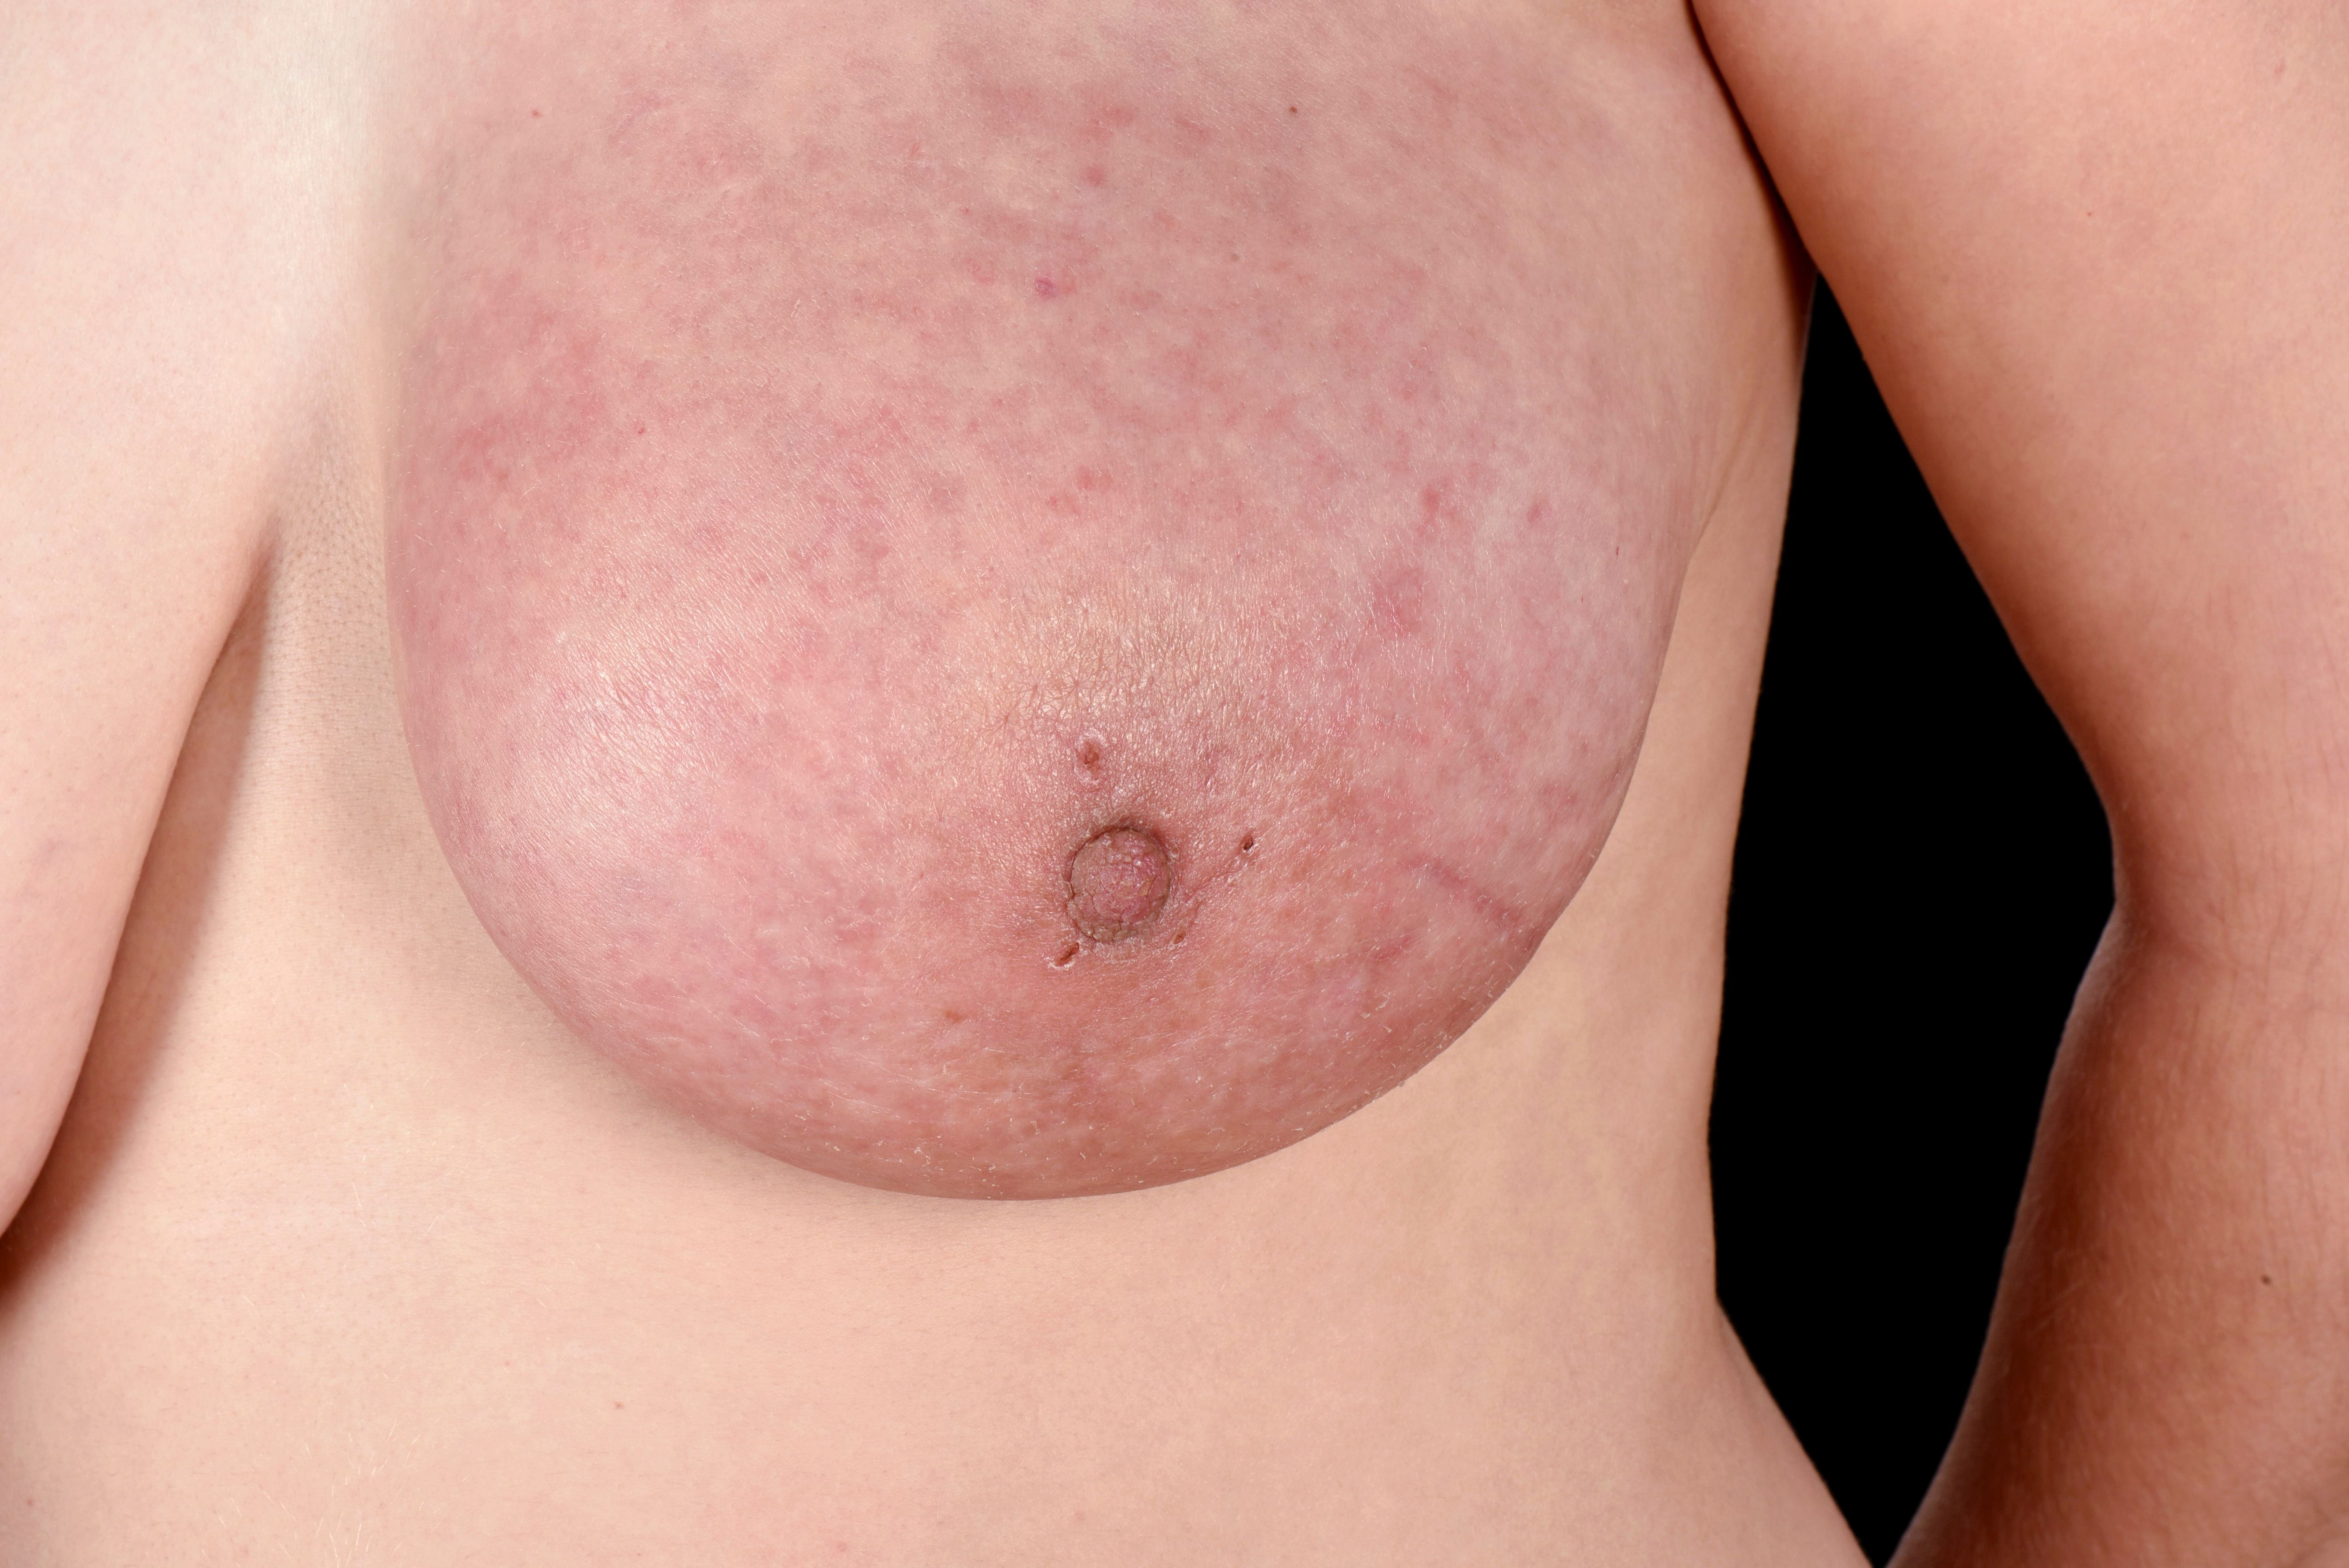 means that a number of breast cells are beginning to multiply abnormally. 